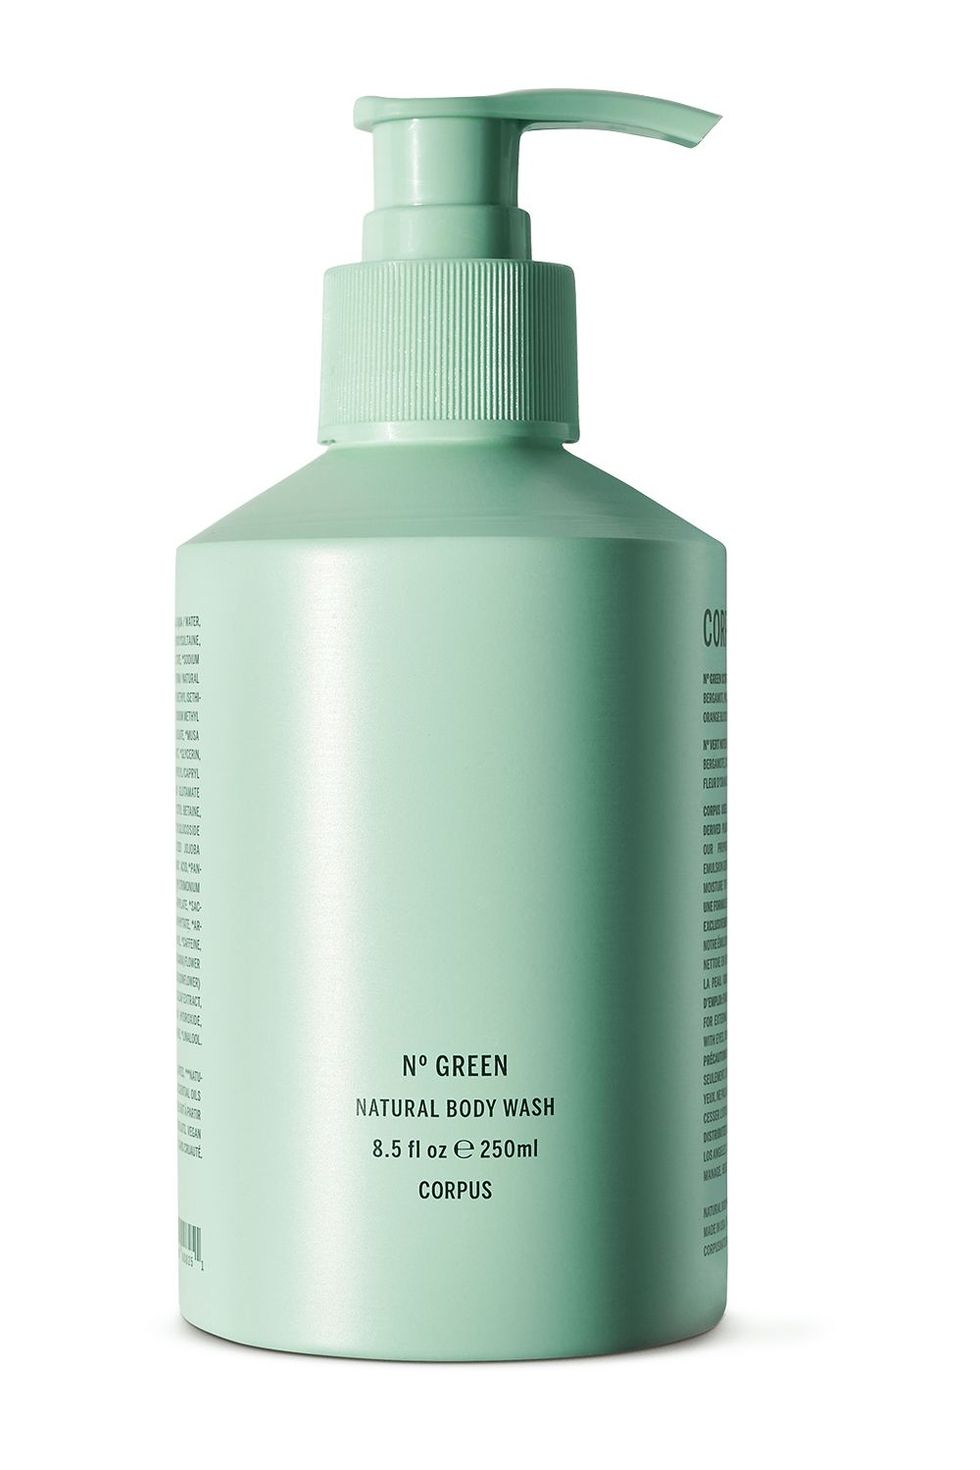 Corpus Natural Body Wash in N° Green